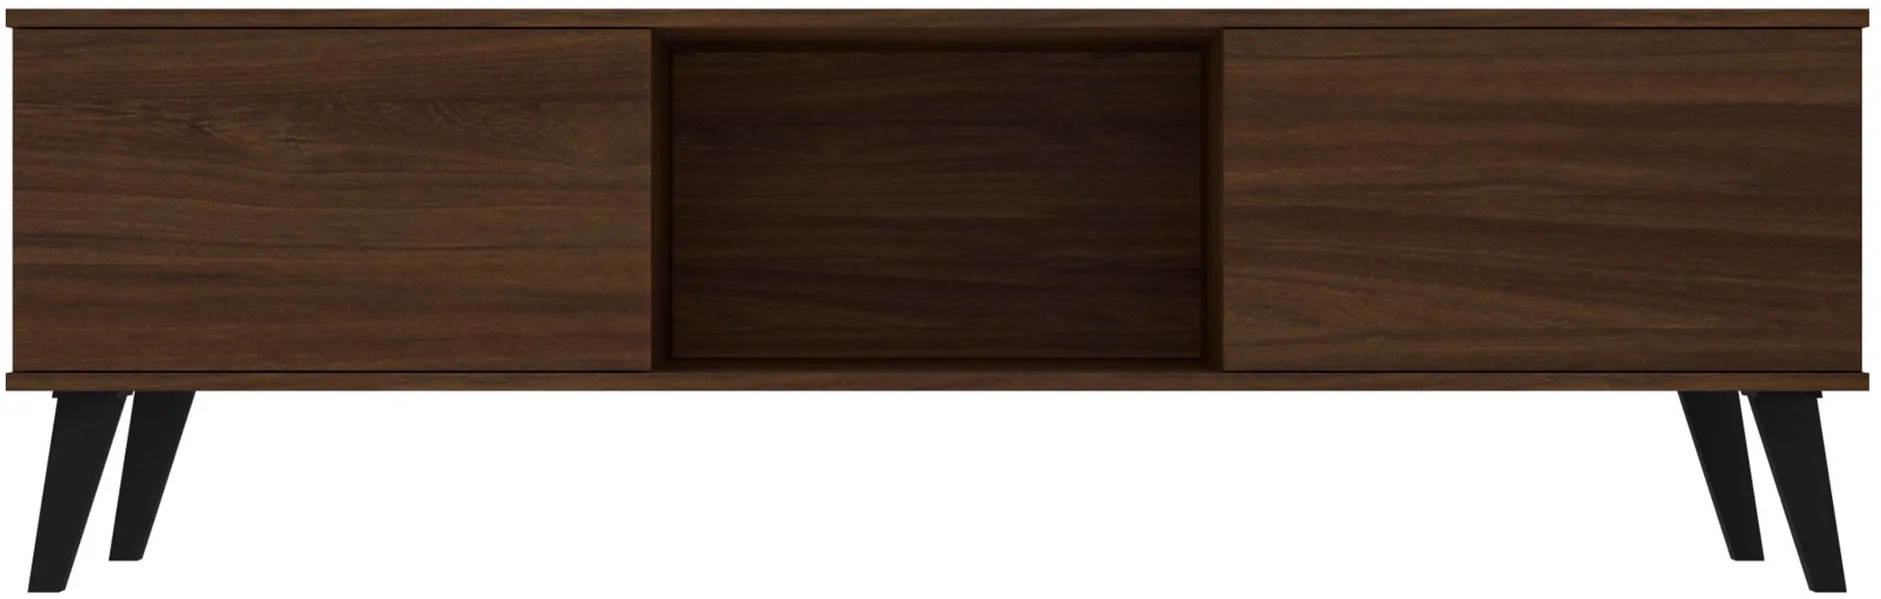 Doyers 62" TV Stand in Nut Brown by Manhattan Comfort